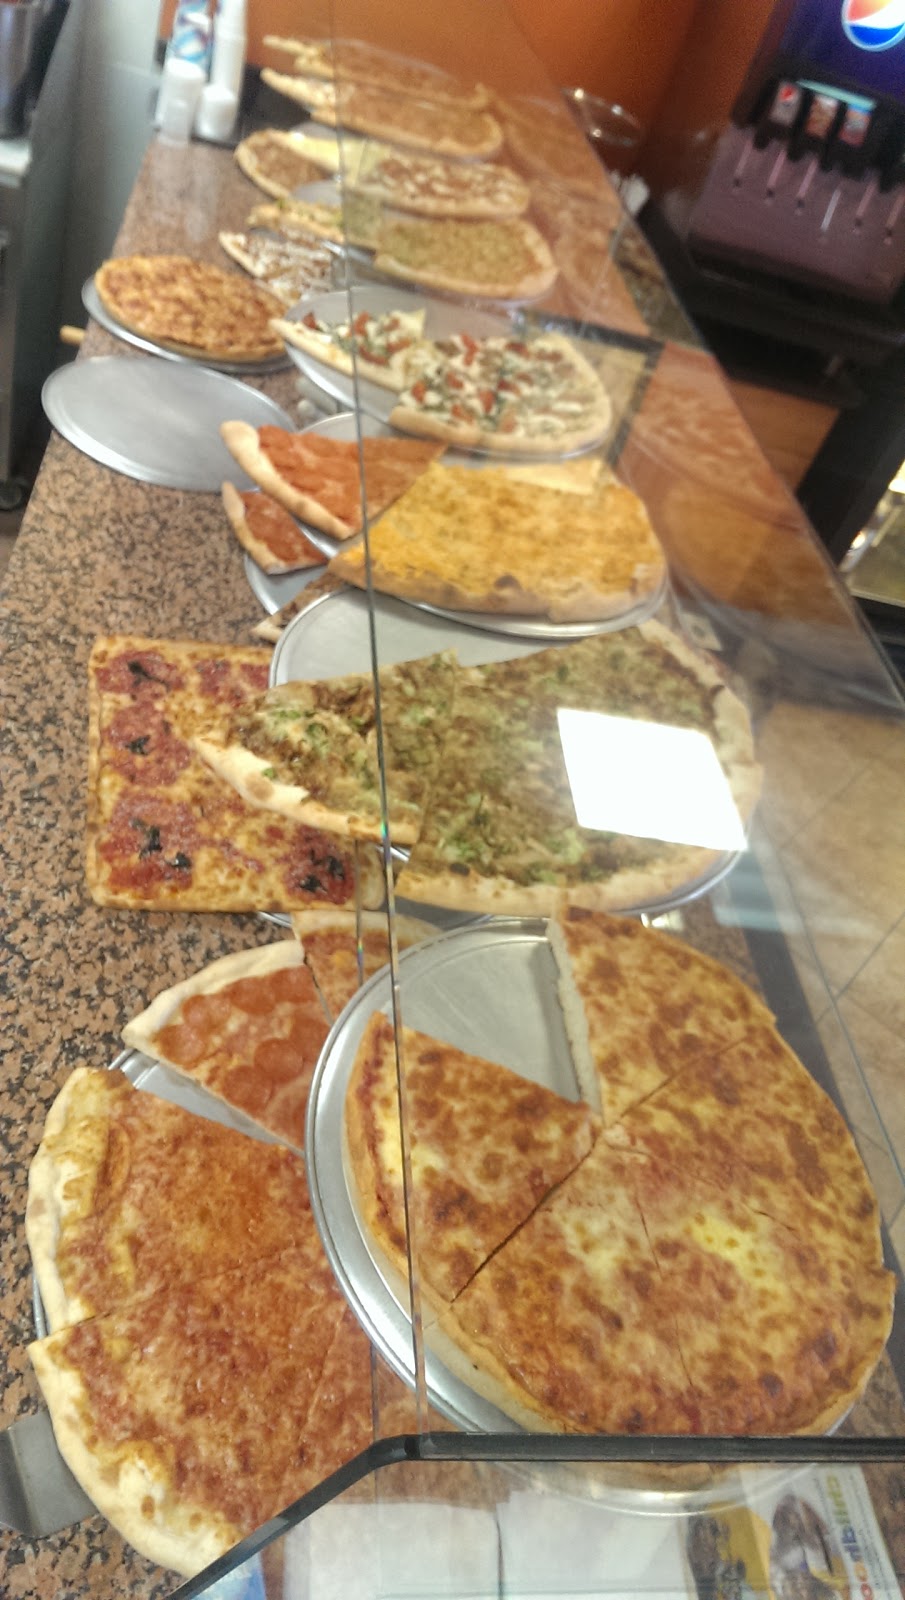 Five Brothers Pizza and Pasta | 2505 Carmel Ave #107, Brewster, NY 10509 | Phone: (845) 278-4500